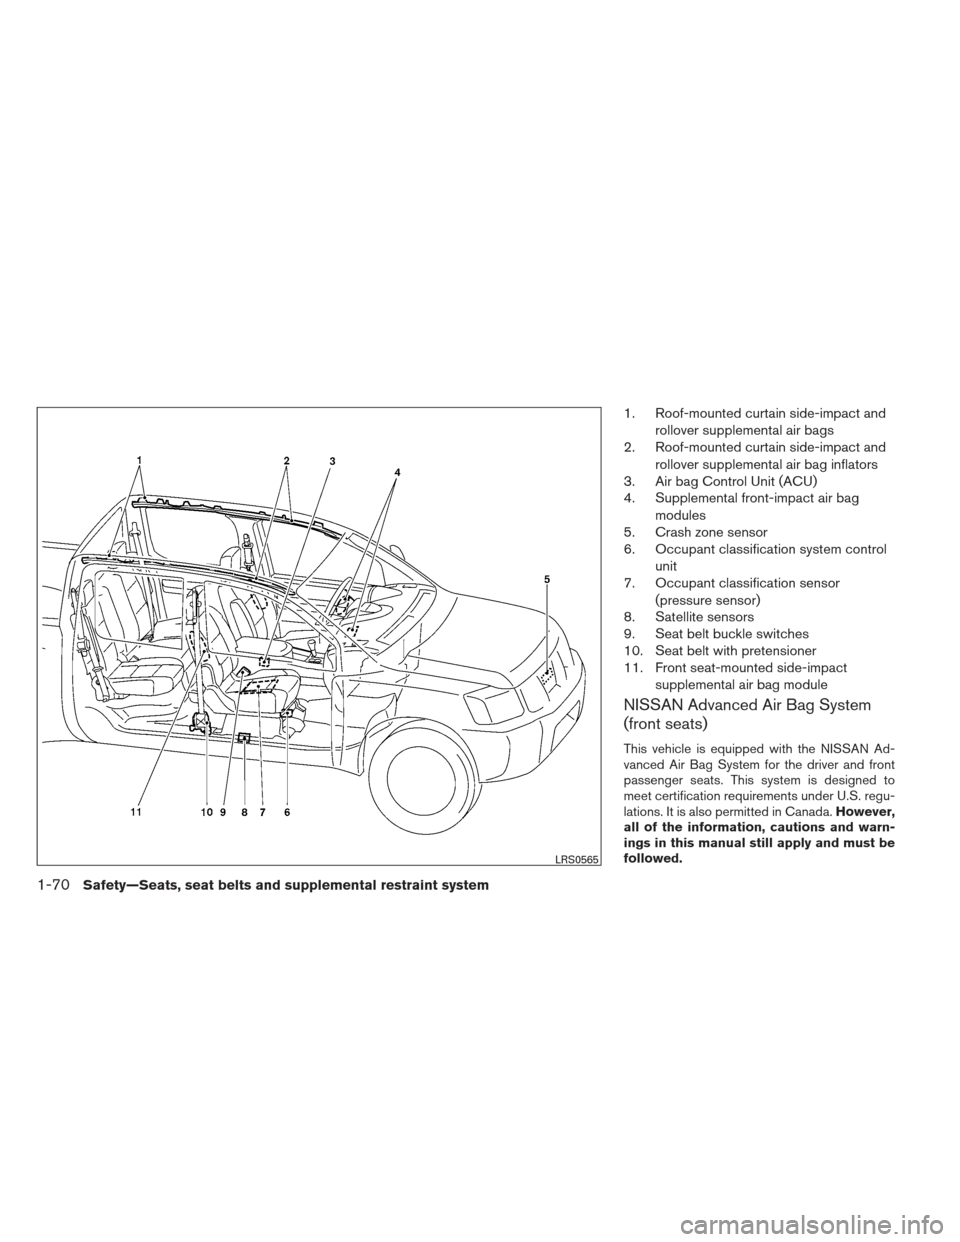 NISSAN FRONTIER 2013 D40 / 2.G Owners Manual 1. Roof-mounted curtain side-impact androllover supplemental air bags
2. Roof-mounted curtain side-impact and
rollover supplemental air bag inflators
3. Air bag Control Unit (ACU)
4. Supplemental fron